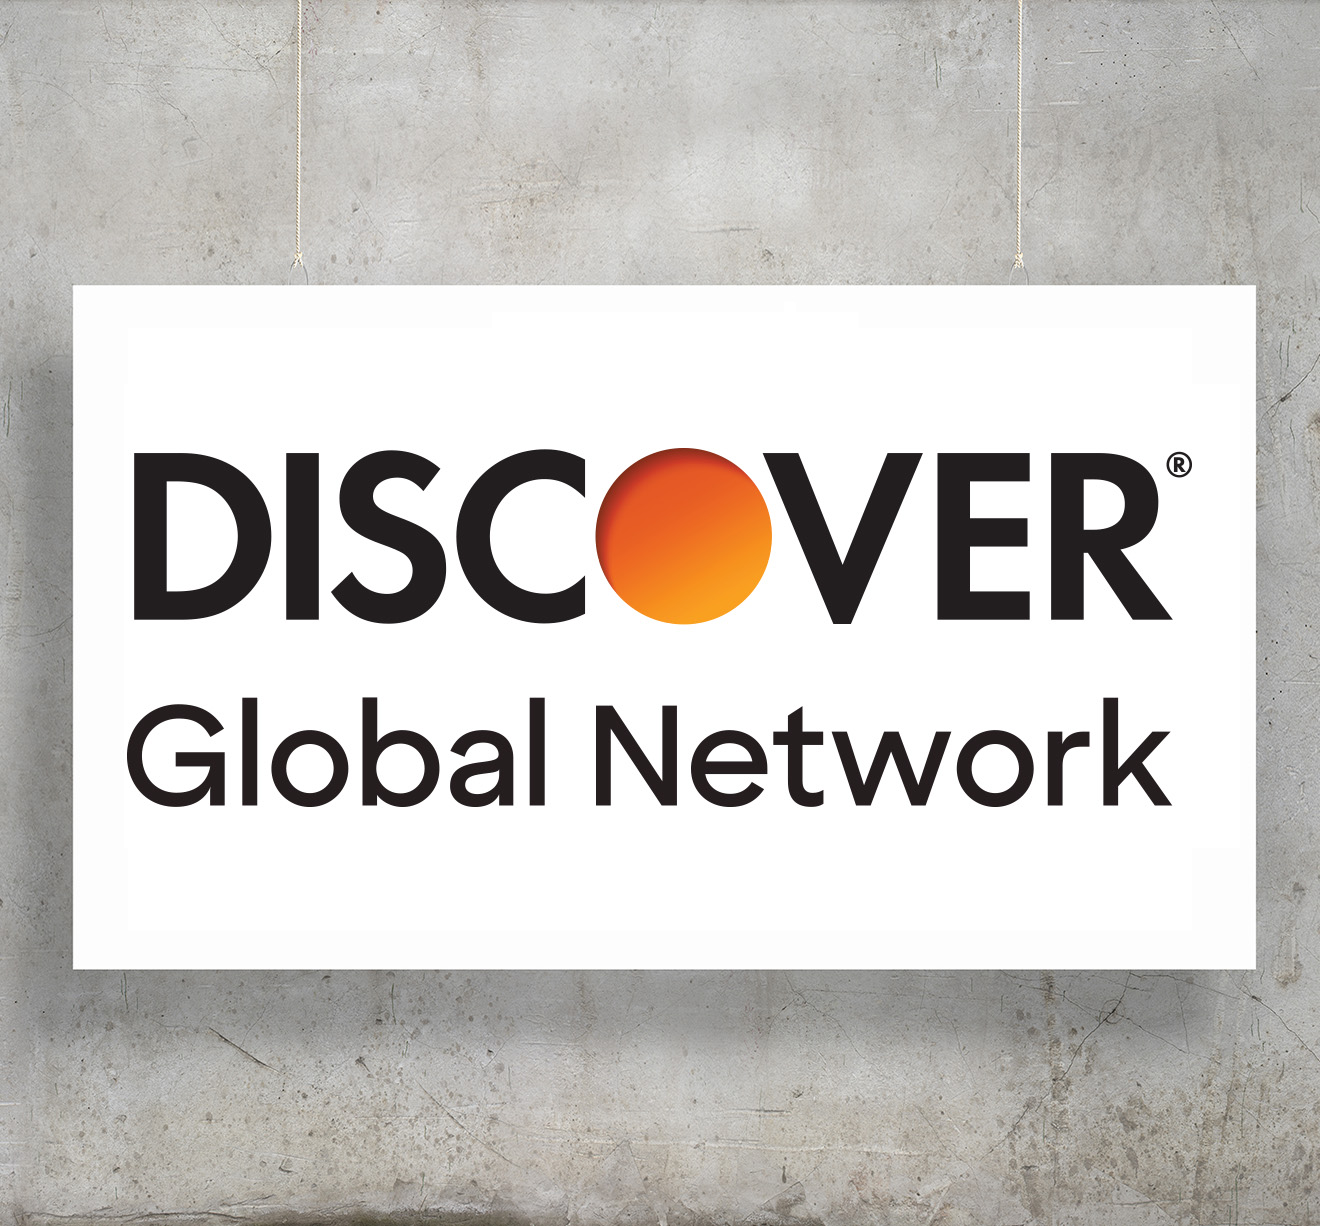 Discover Global Network company profile